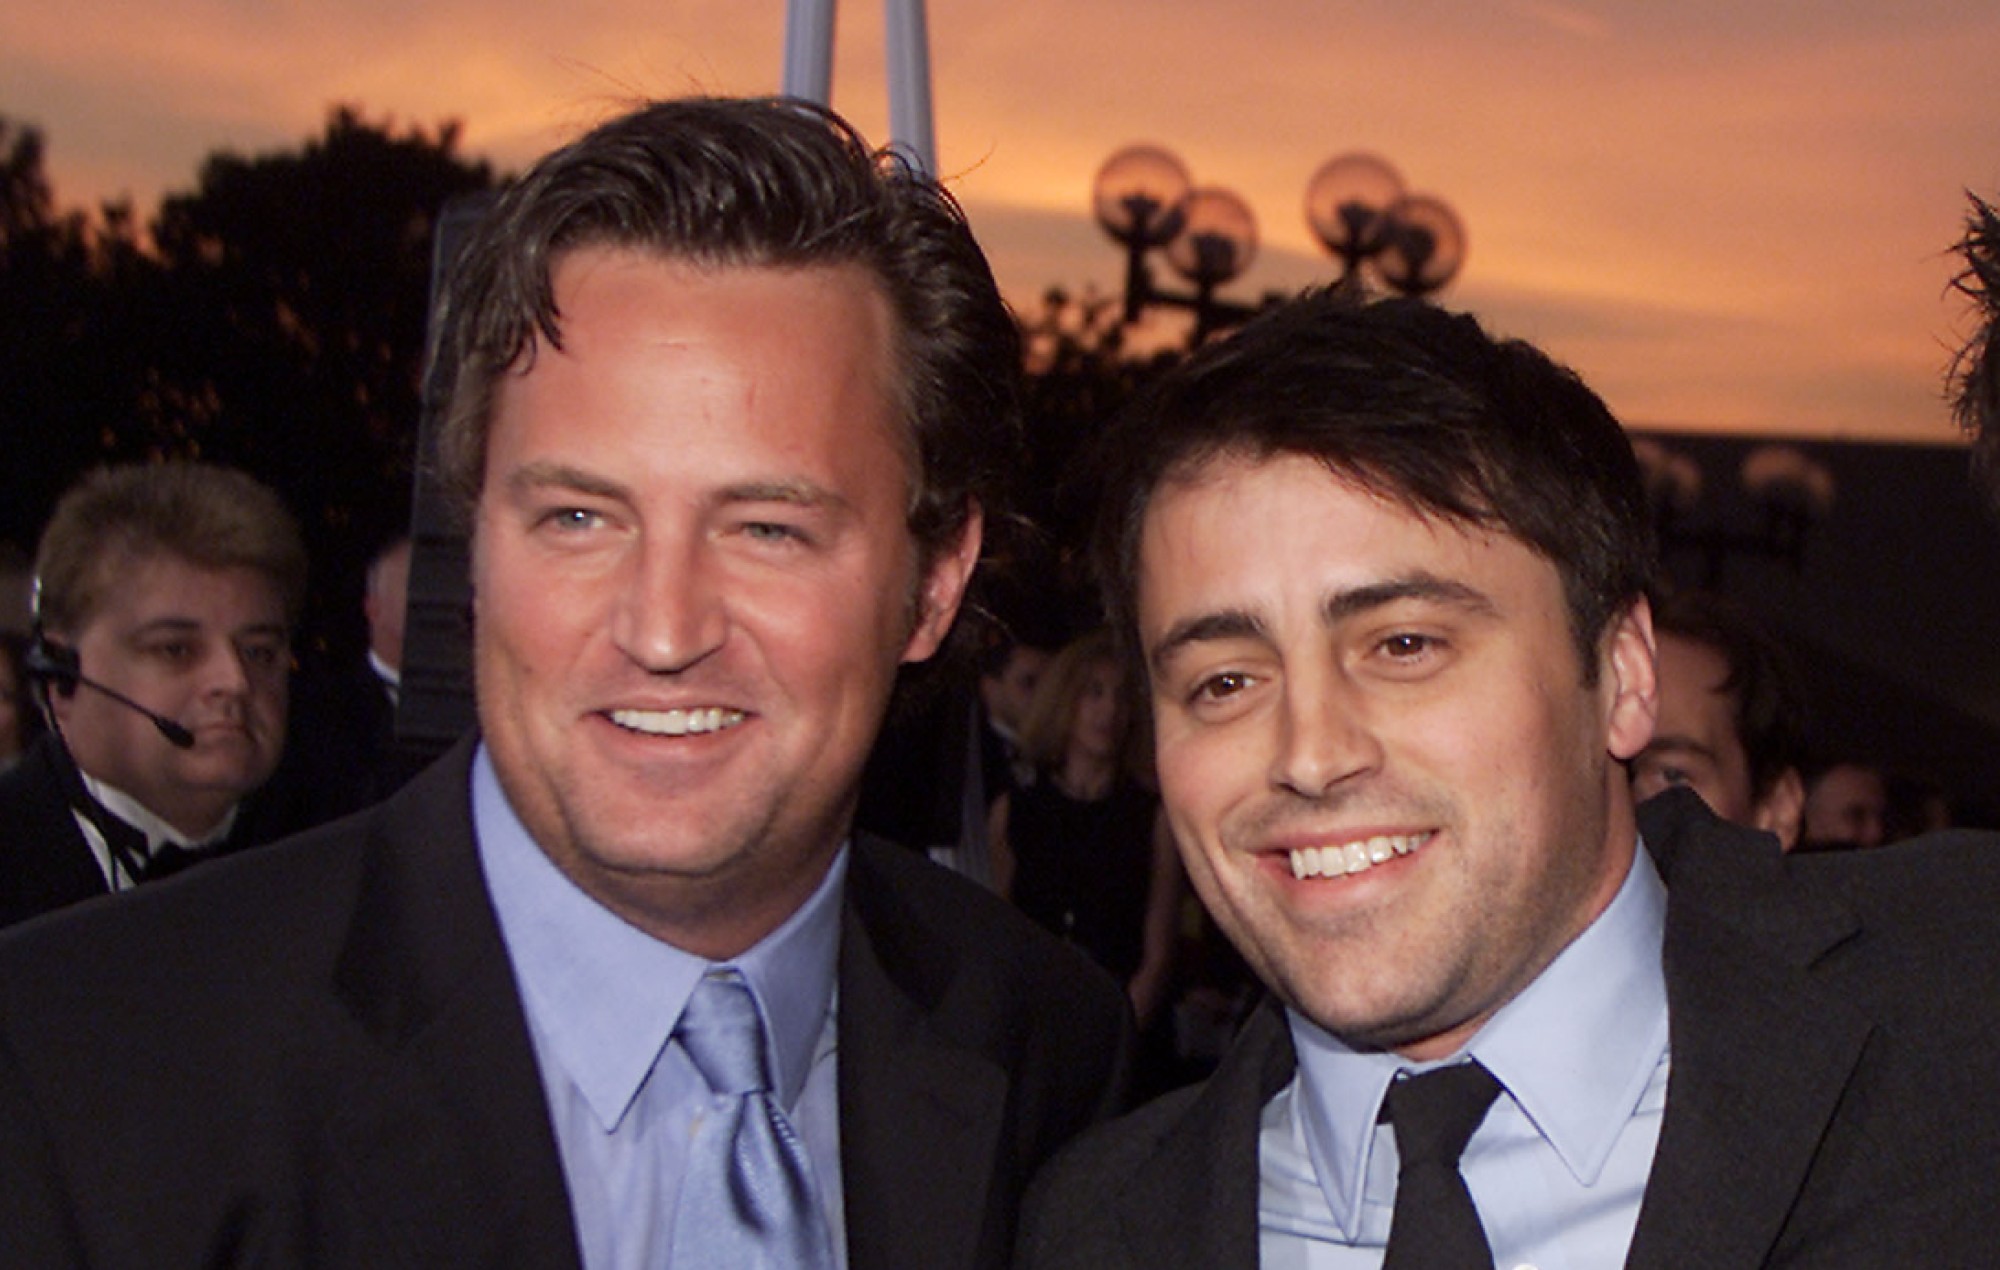 Matt LeBlanc pays tribute to ‘Friends’ co-star Matthew Perry: “I’ll never forget you”